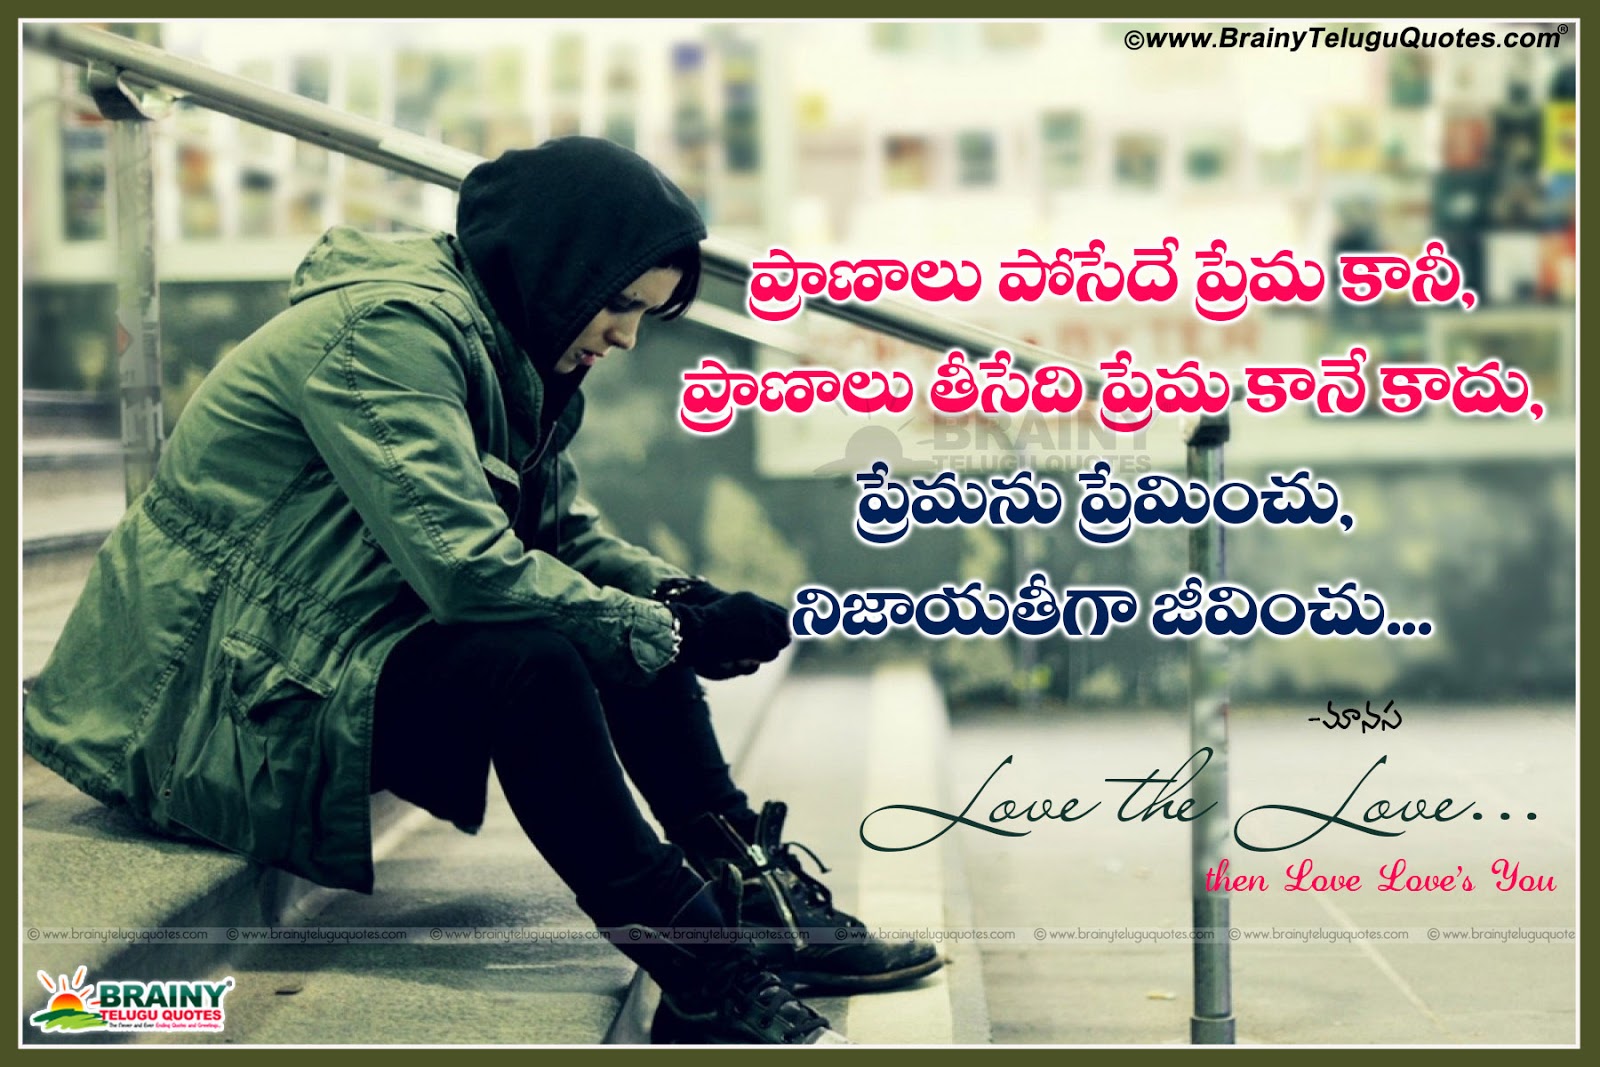 Telugu True Love Quotes and Nice in Telugu Language Worlds Best Love Quotes for